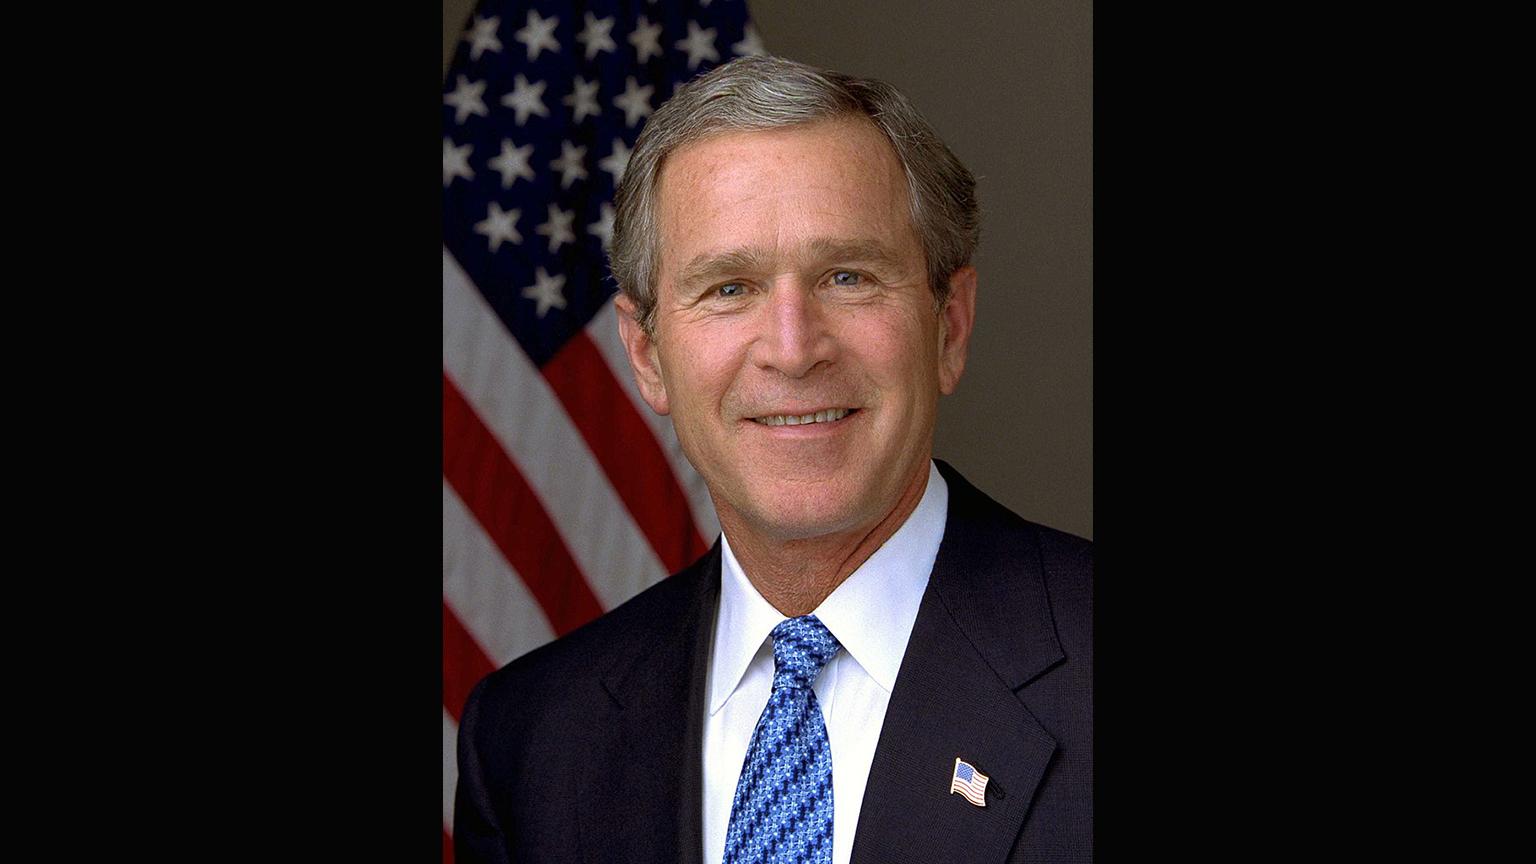 W. Bush to Receive Award from Lincoln Foundation Chicago News